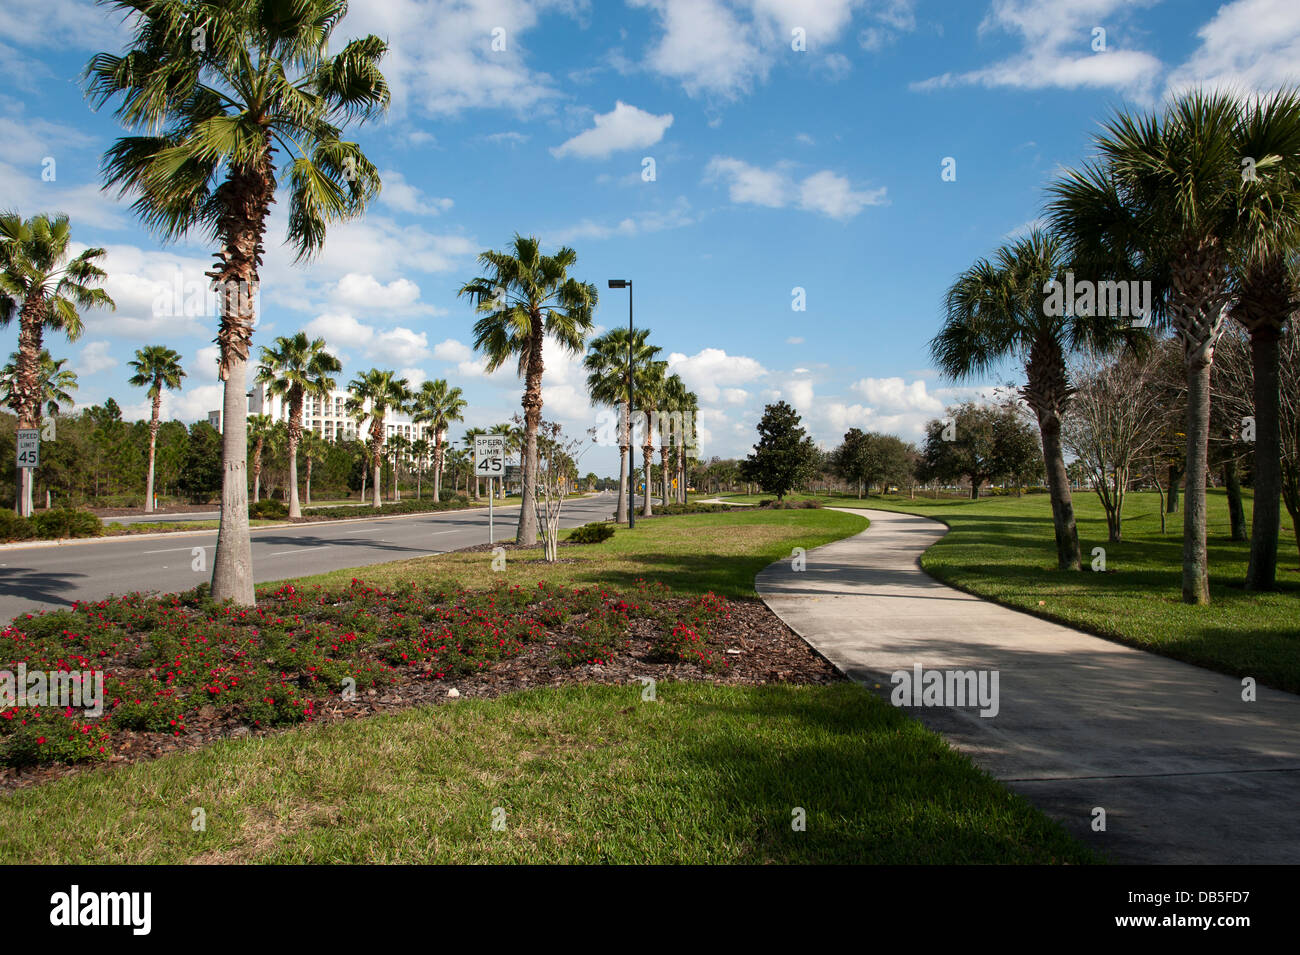 International Drive, outside the Orange county convention centre. 45mph speed limit signs visible. Stock Photo